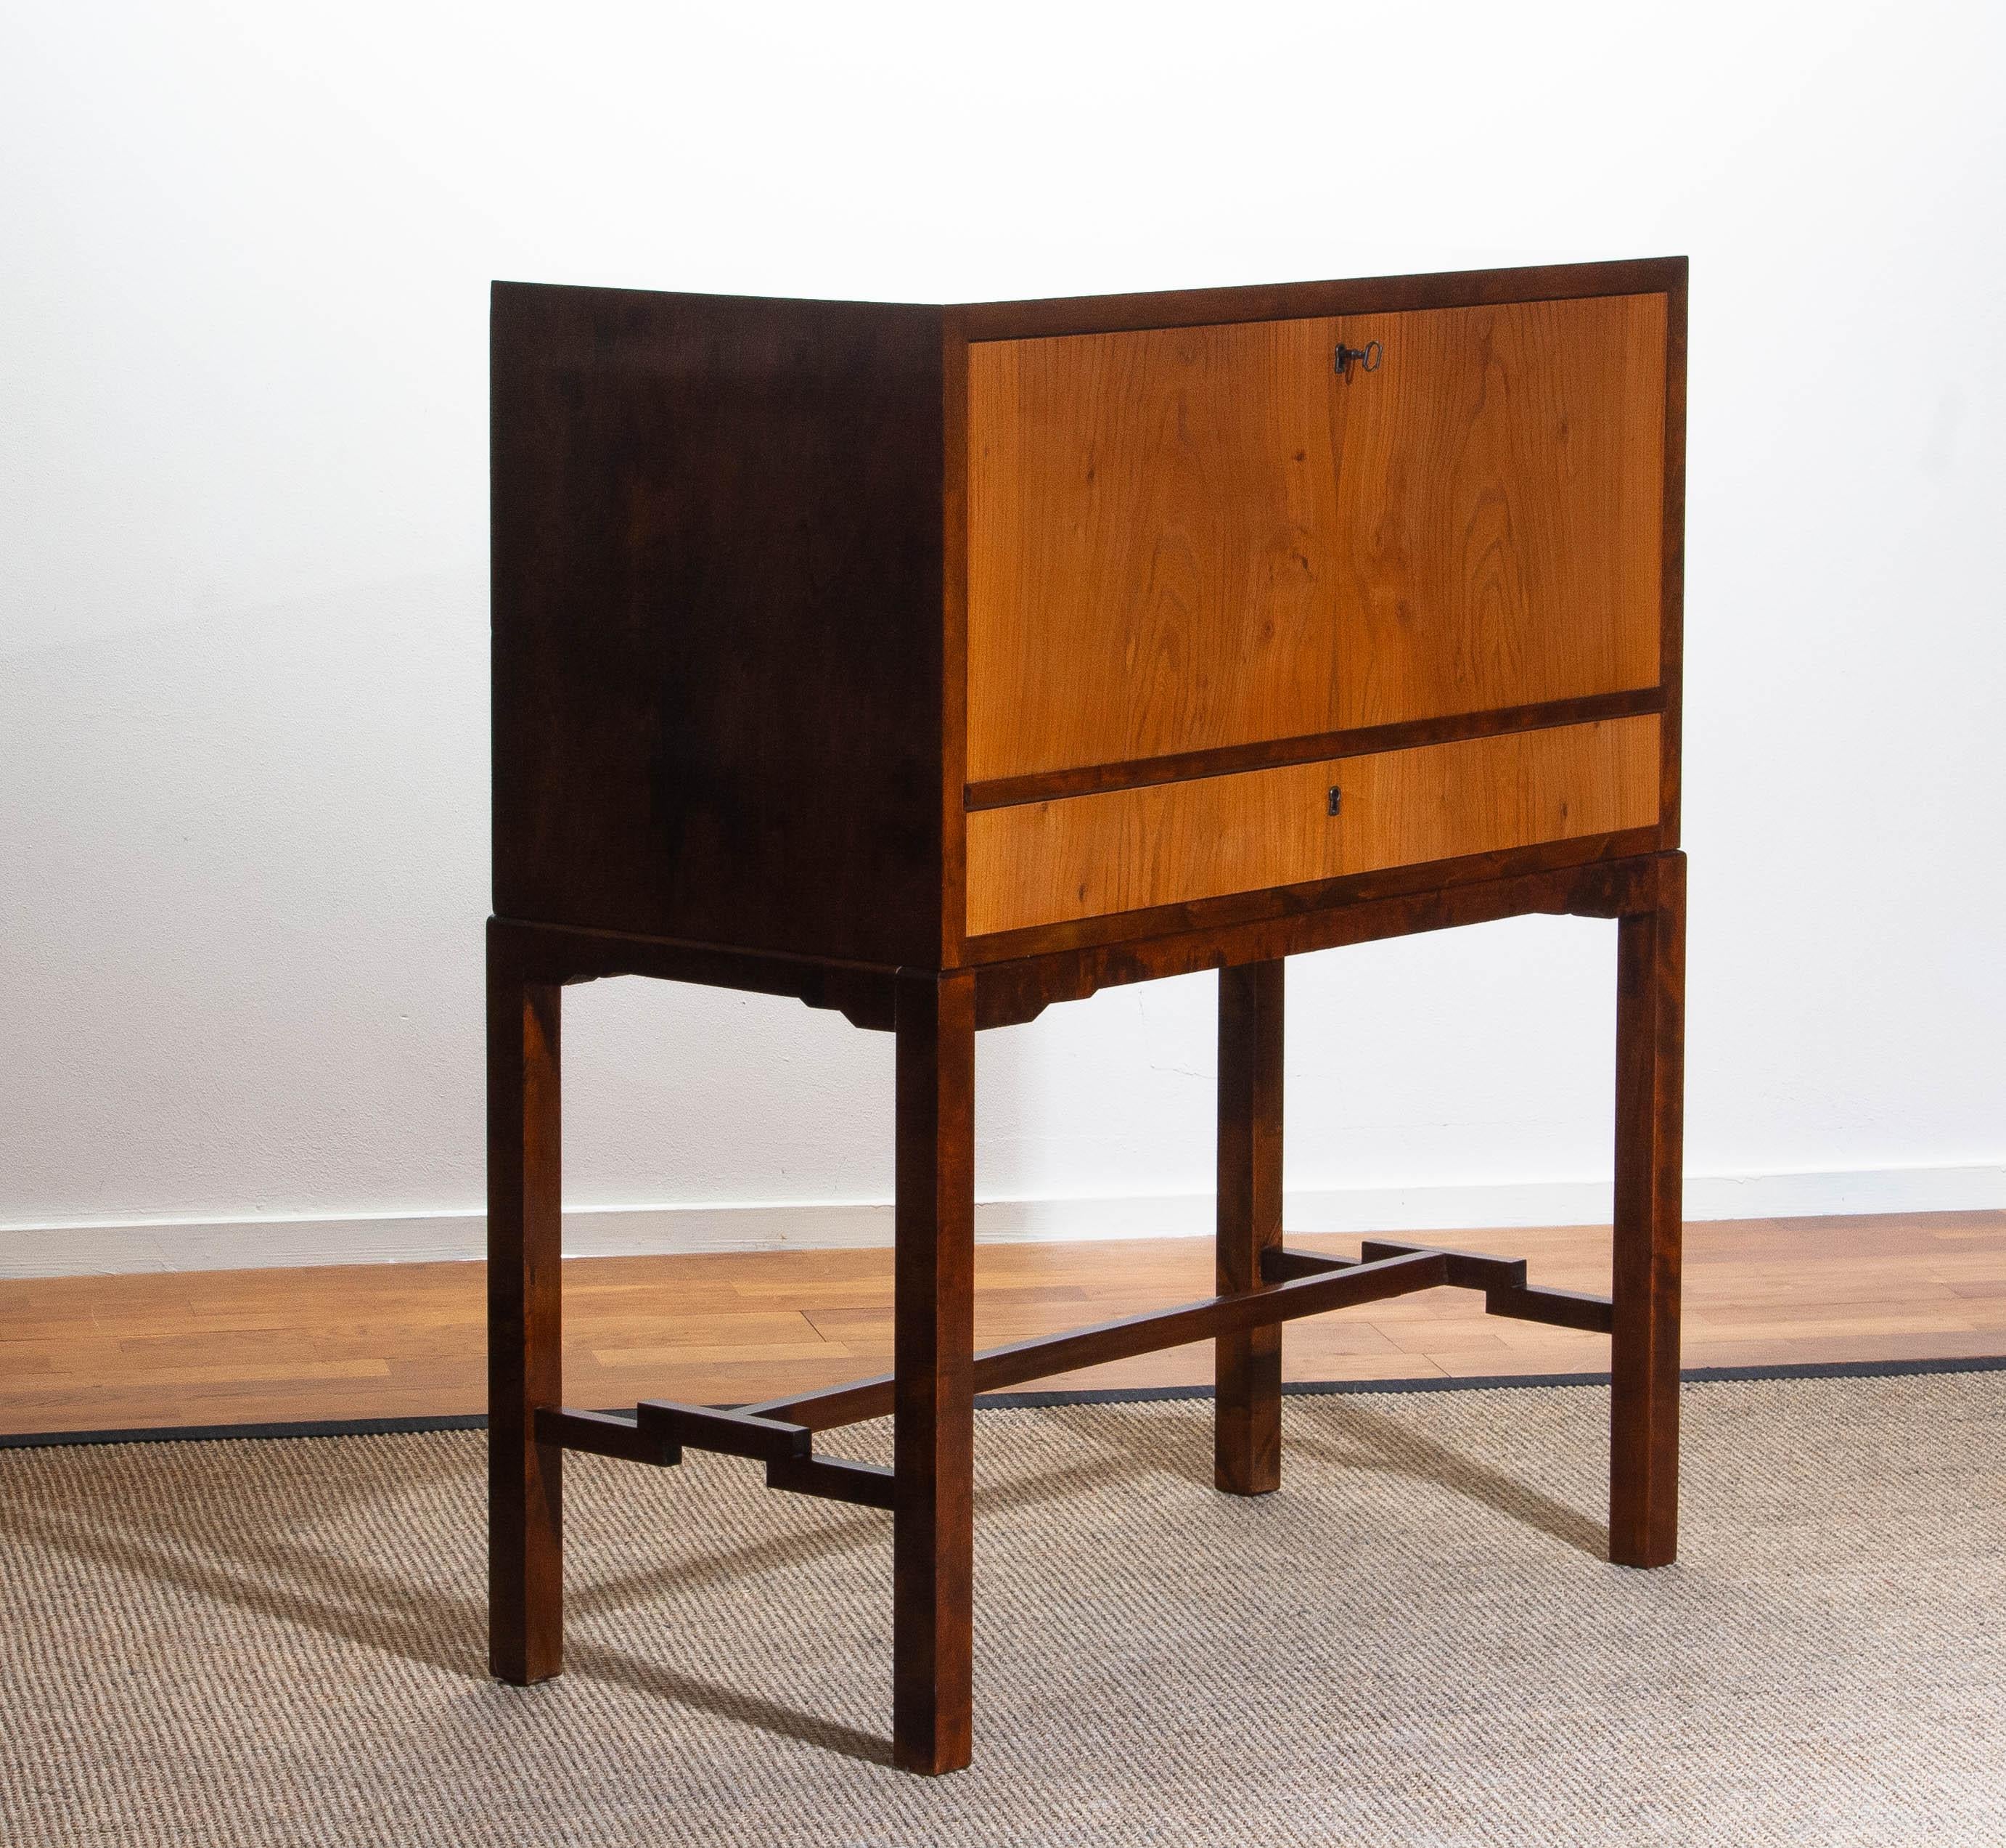 Extremely luxury and high quality secretaire from the 1930s made by Nordiska Kompaniet Stockholm in walnut - elm - birch and mahogany.
Secretaire and front drawer both open / lock with the same key. Secretaire and front drawer are veneered in open